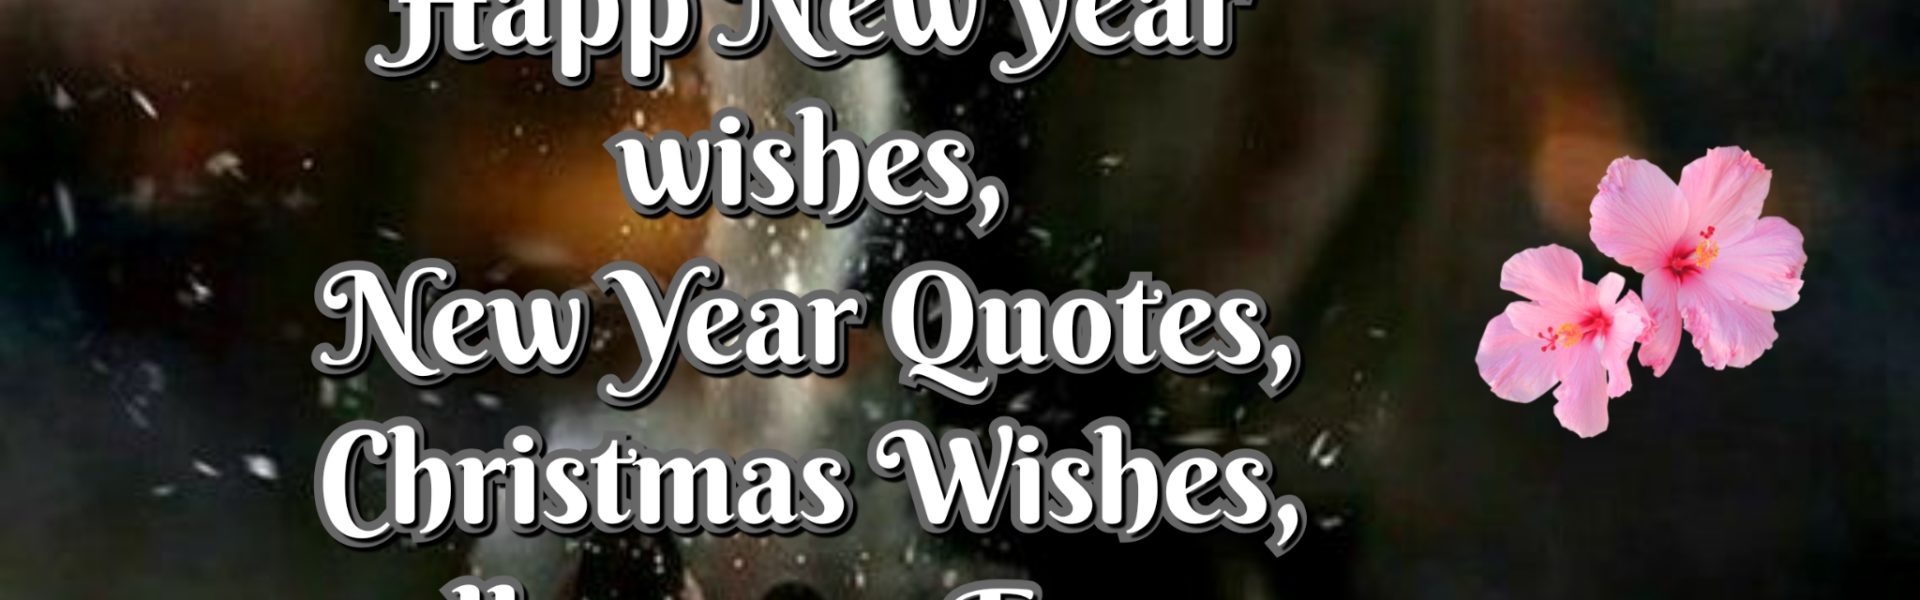 2020 New Year Wishes Quotes Wallpapers Funny Happy Sad Quotes